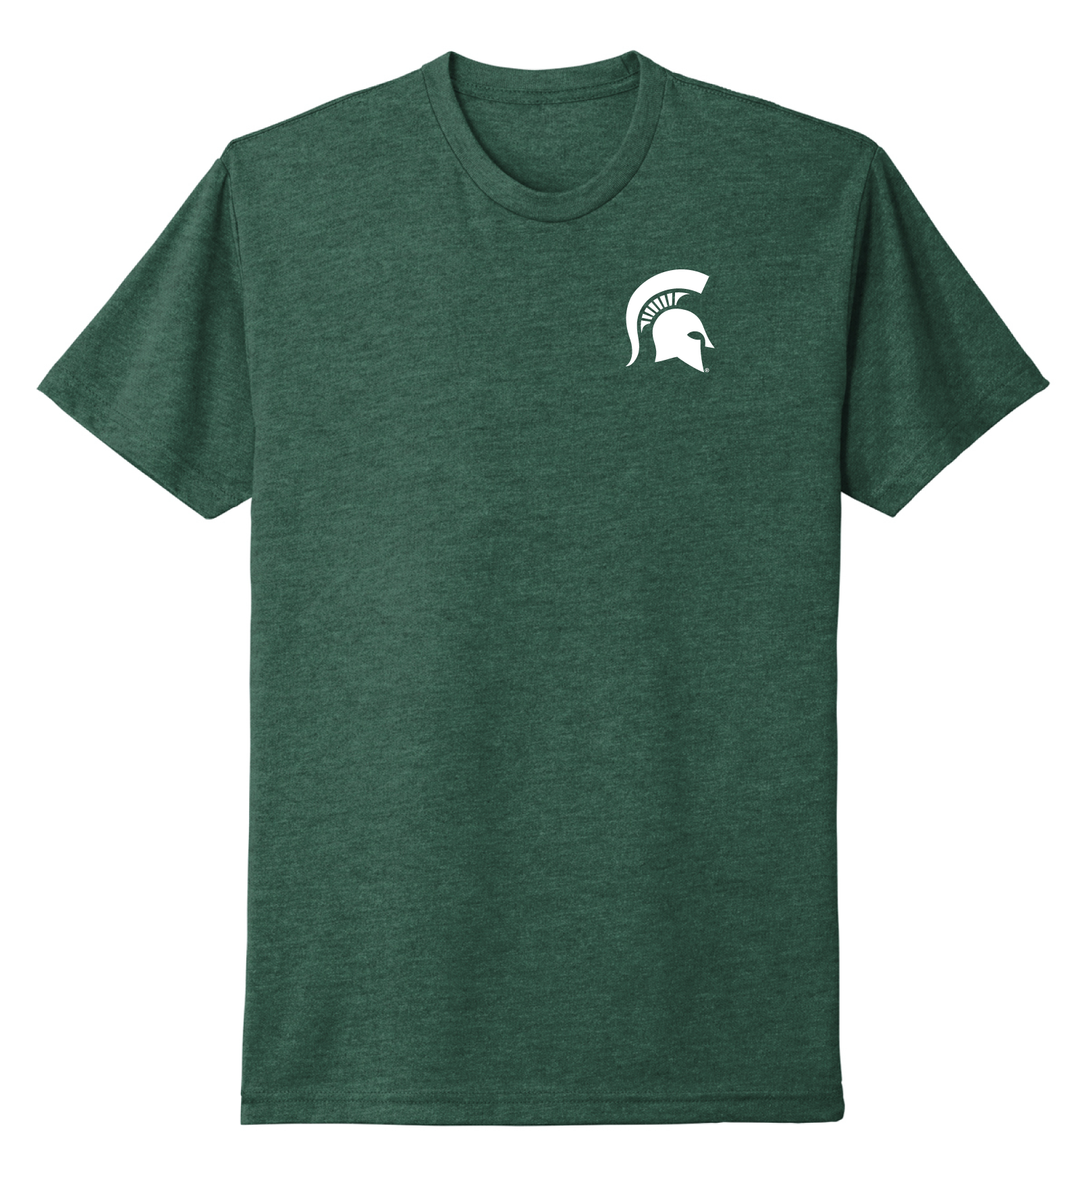 Green MSU T Shirt with Spartan Helmet from Nudge Printing